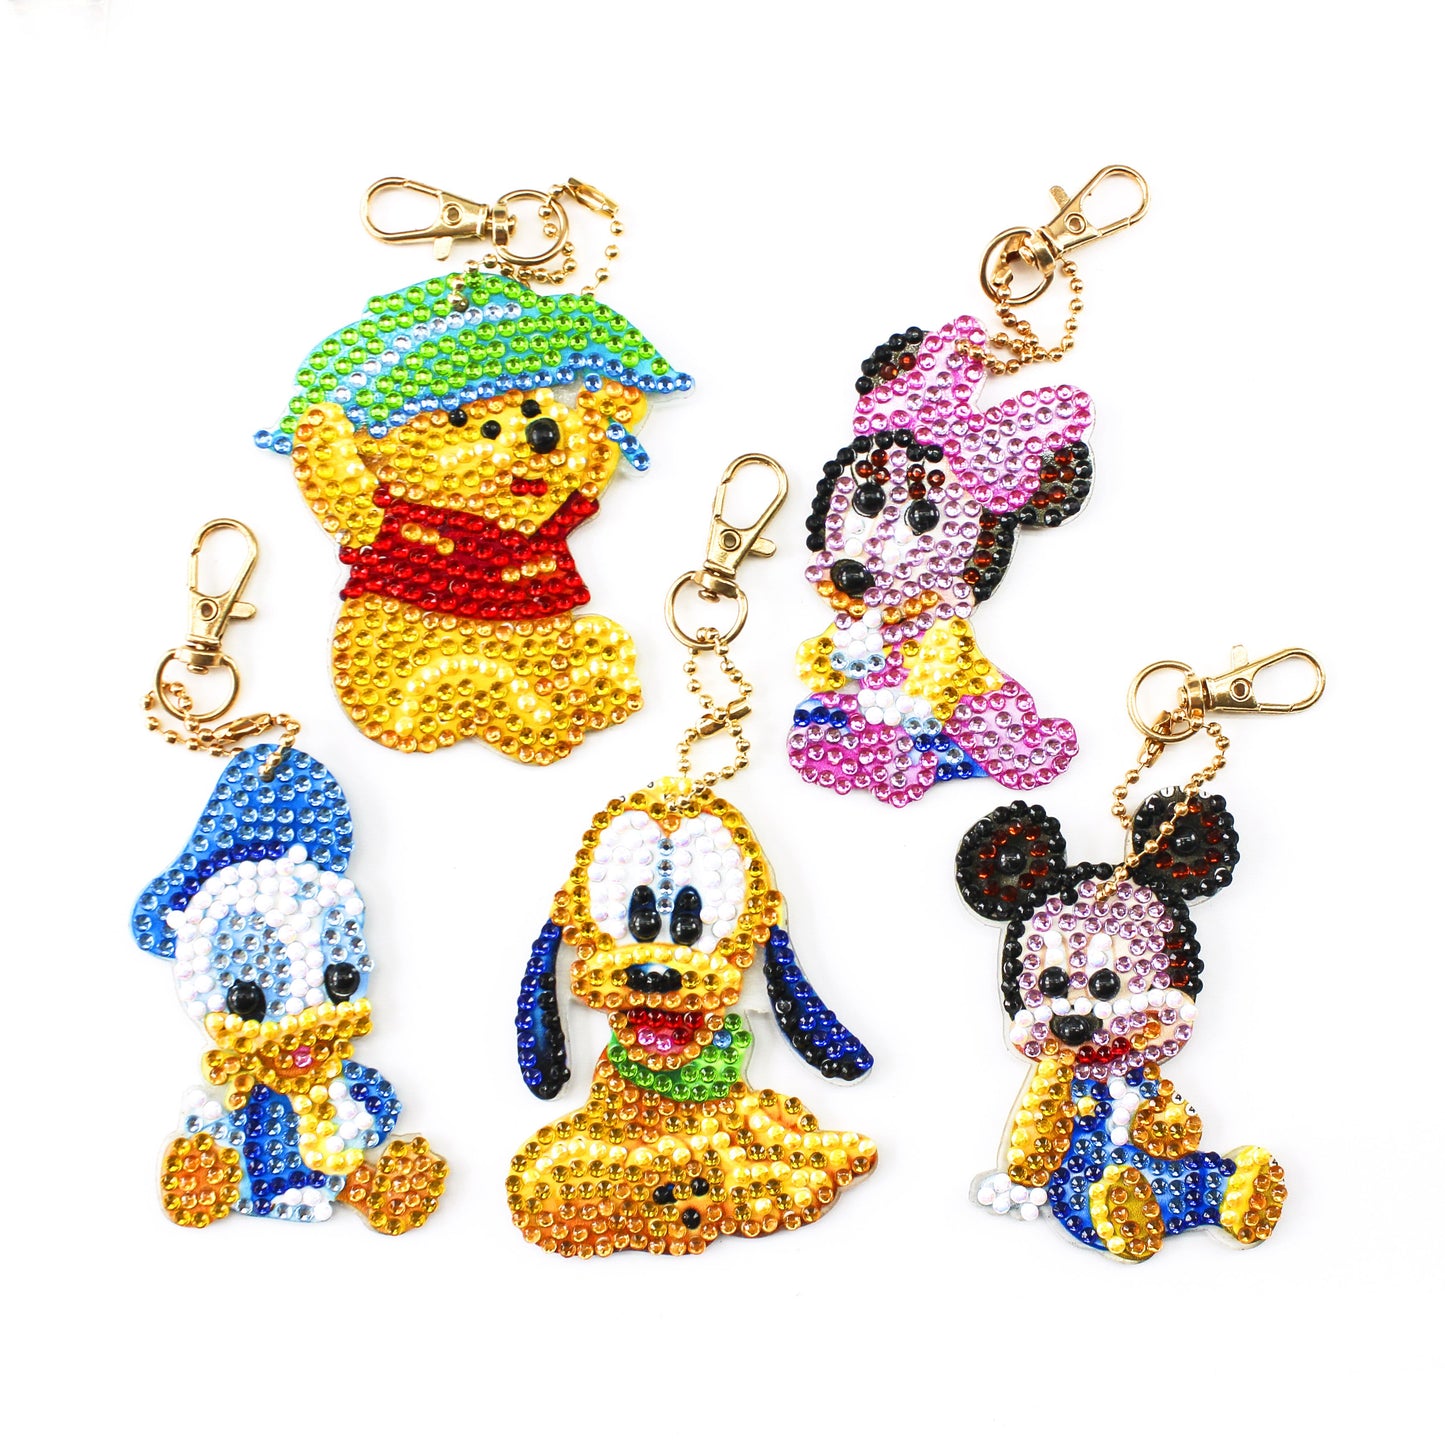 Double-sided stickers special diamond painted keychain key ring-Donald Duck